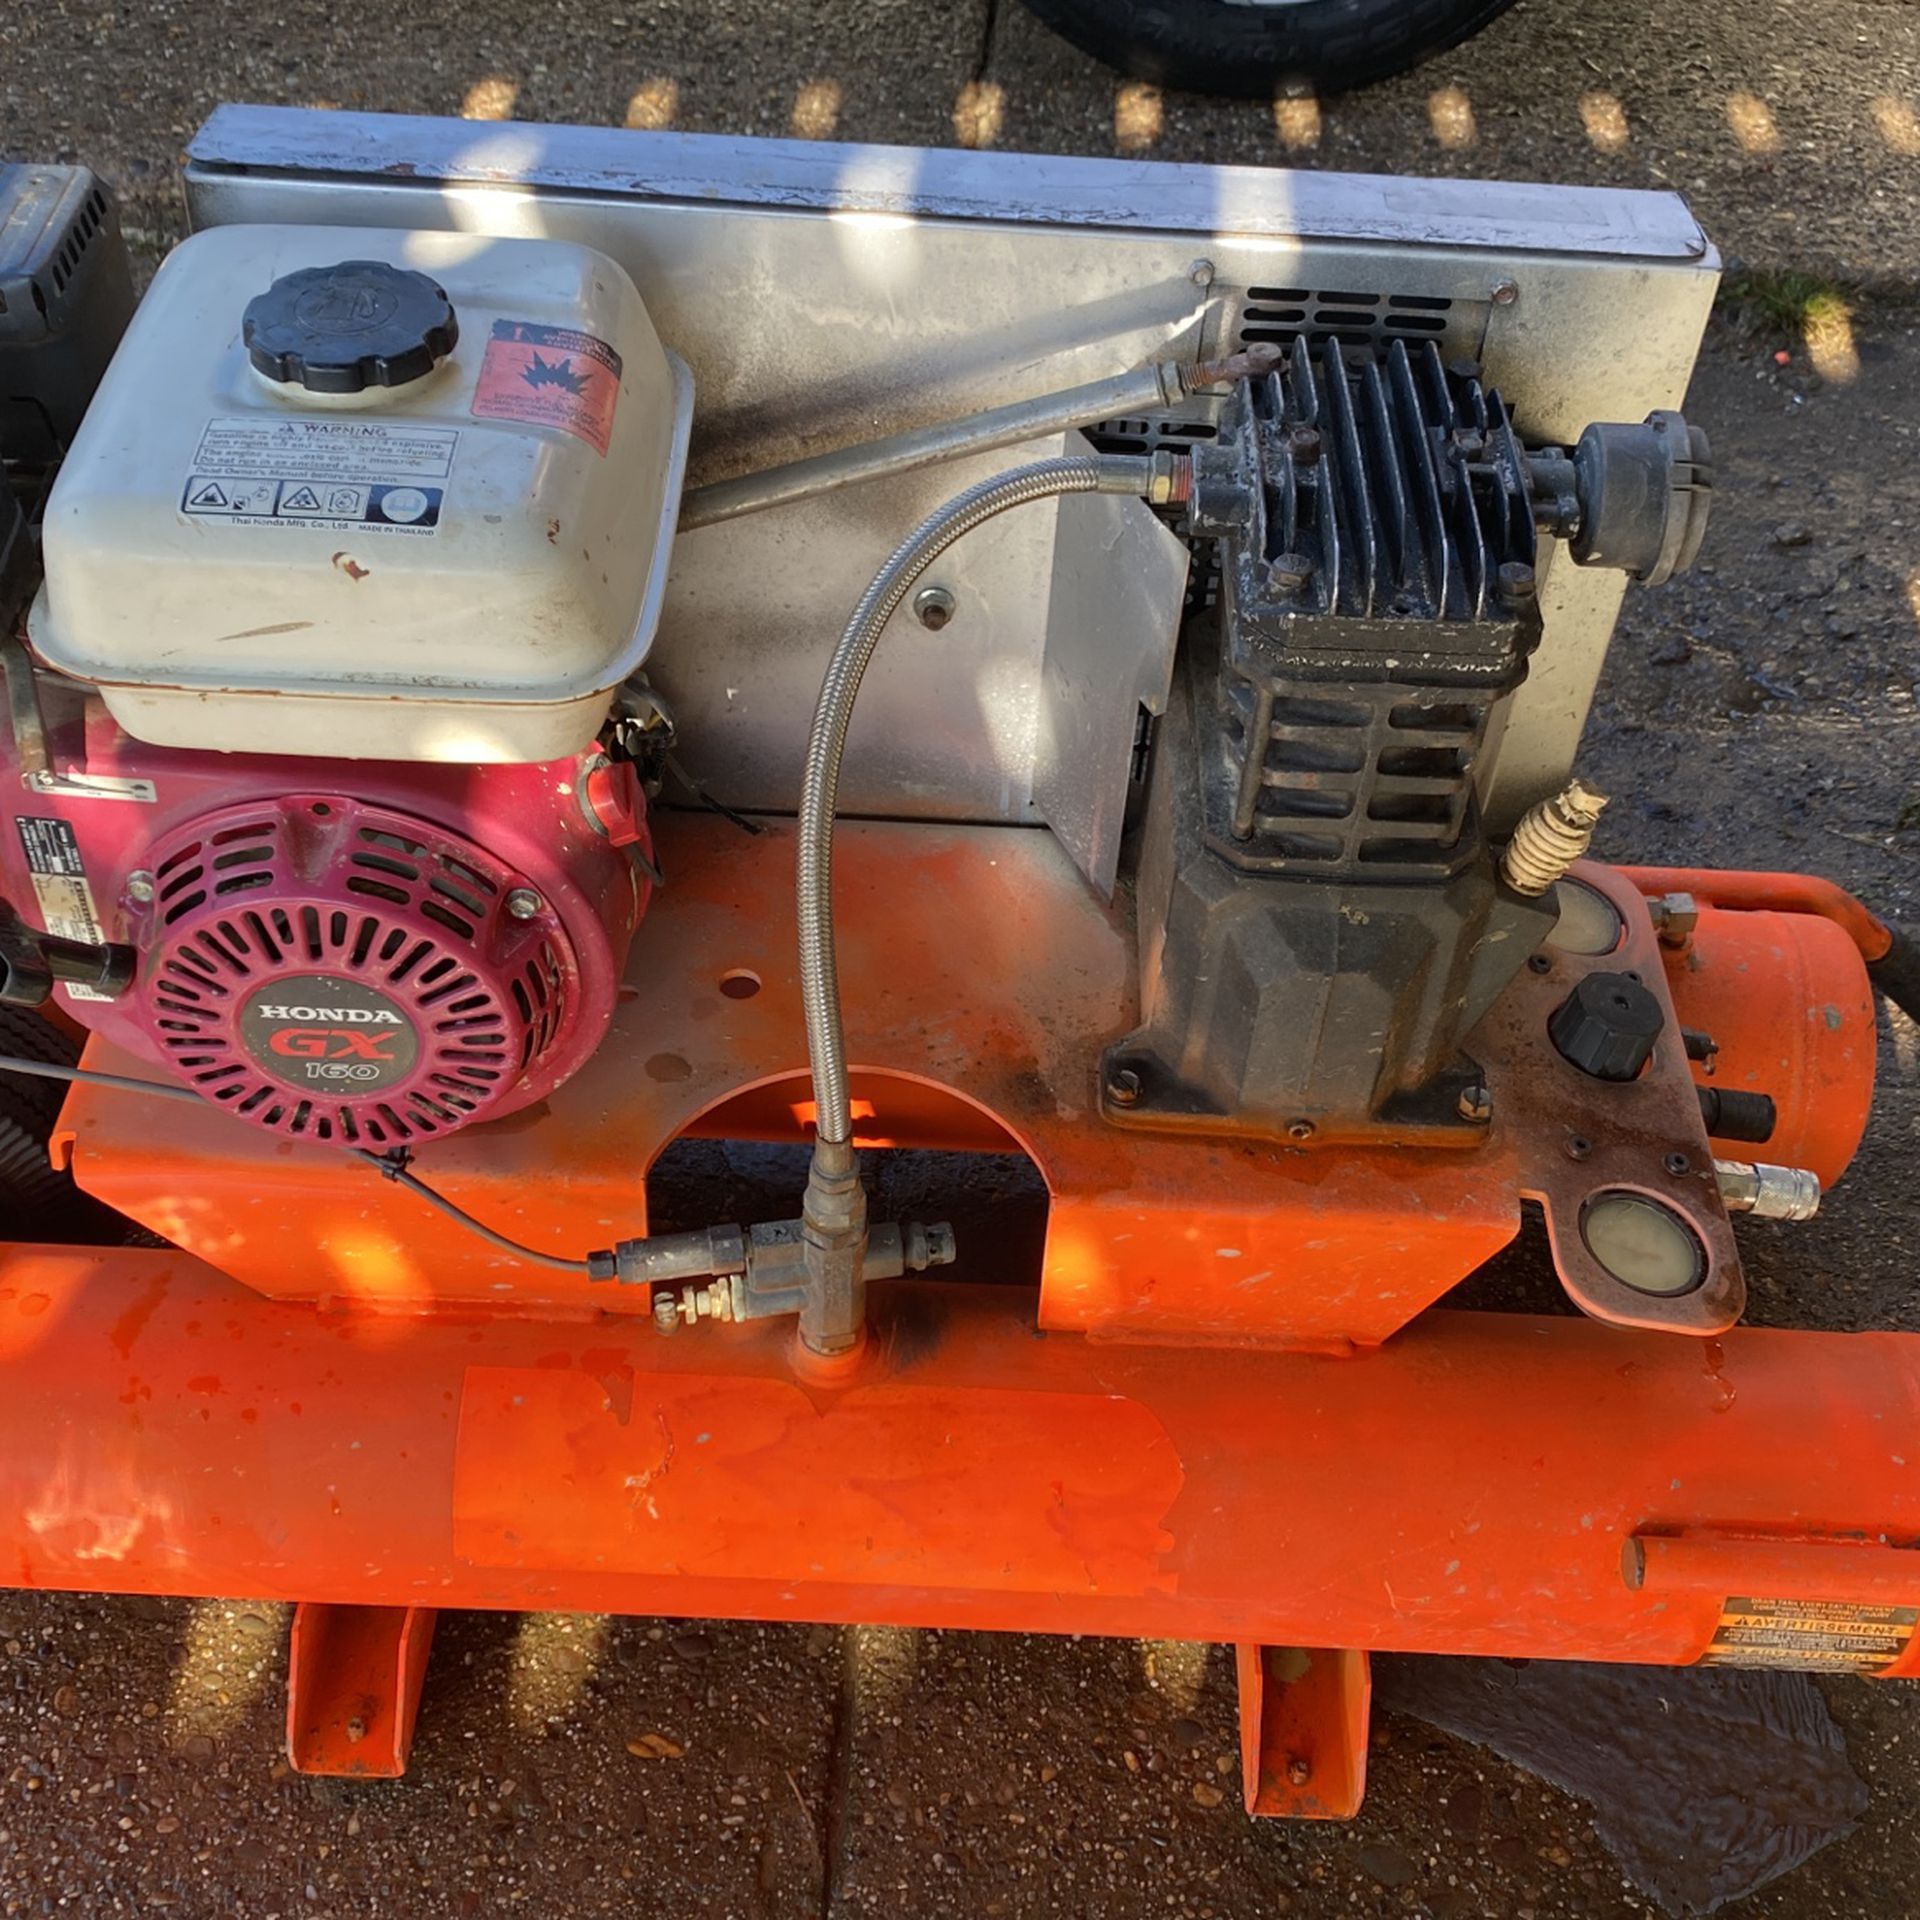 Gasoline Air Compressor Ridgid With Two Tank Honda Engine In Working Condition $325 Obo